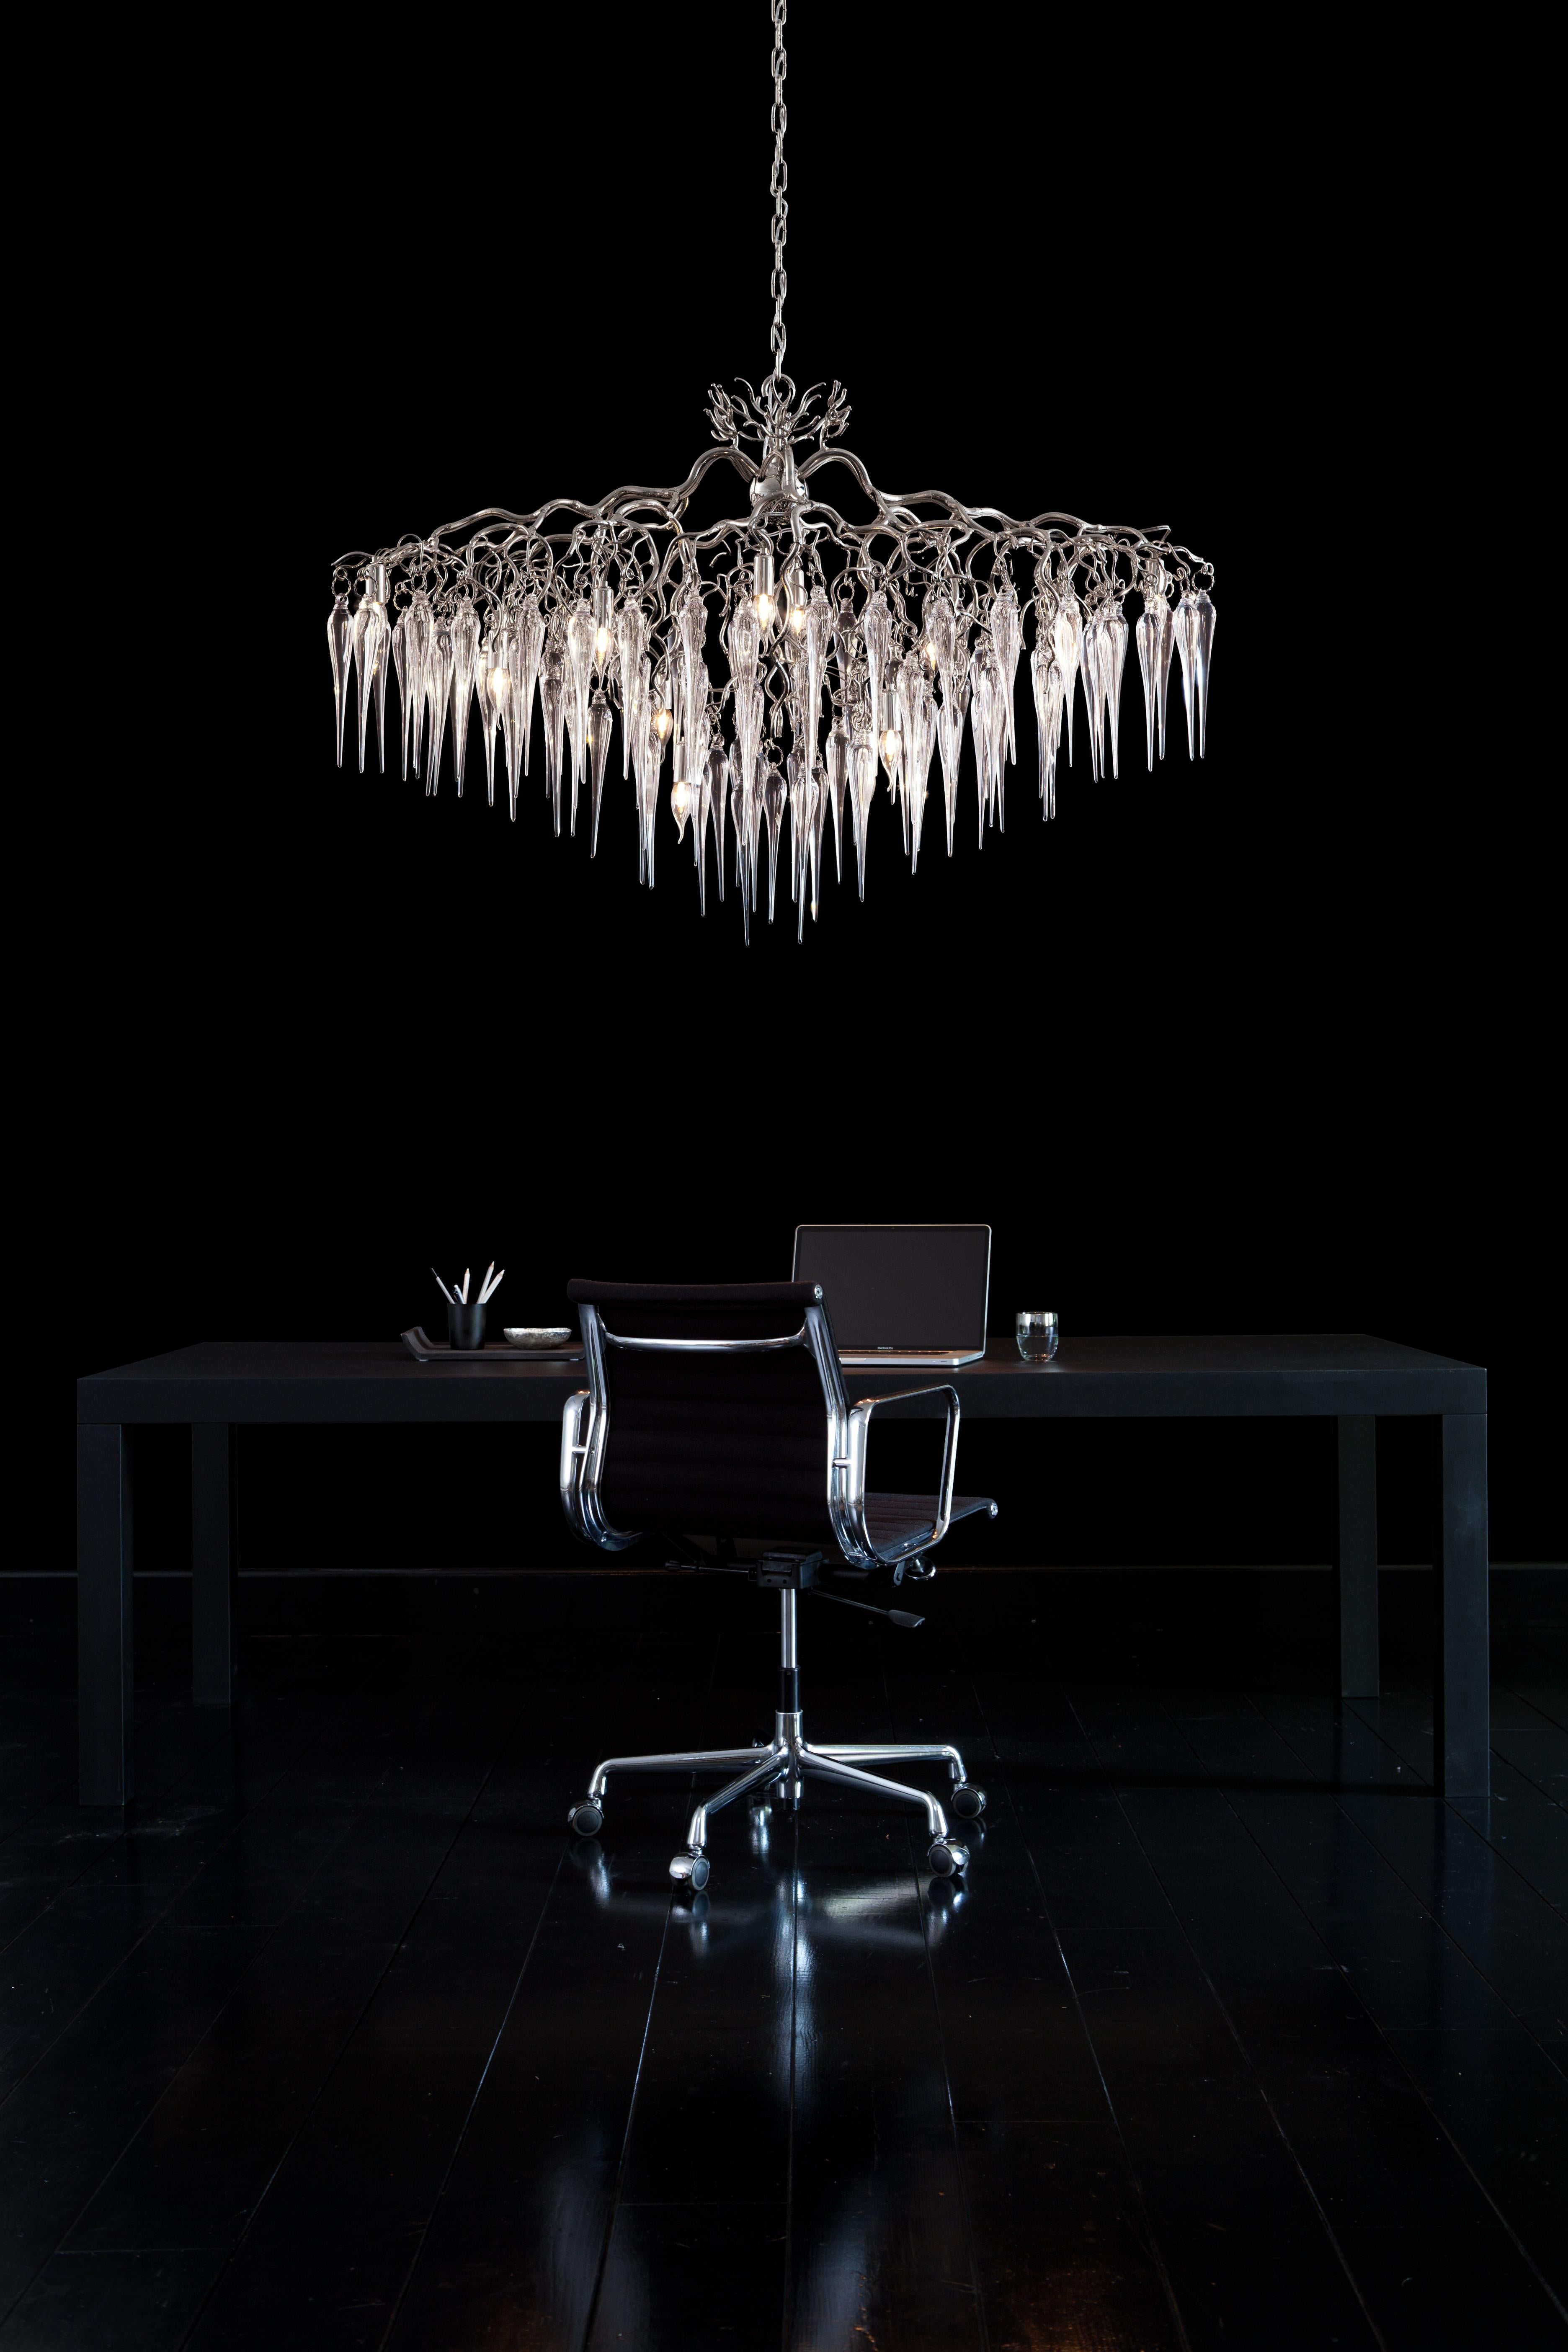 This modern chandelier in a nickel finish is dressed with mouthblown glass icicles, crafted in our own atelier. The Hollywood Icicles collection is designed by William Brand, founder of Brand van Egmond.

In the sheltered heart of a tree, when the